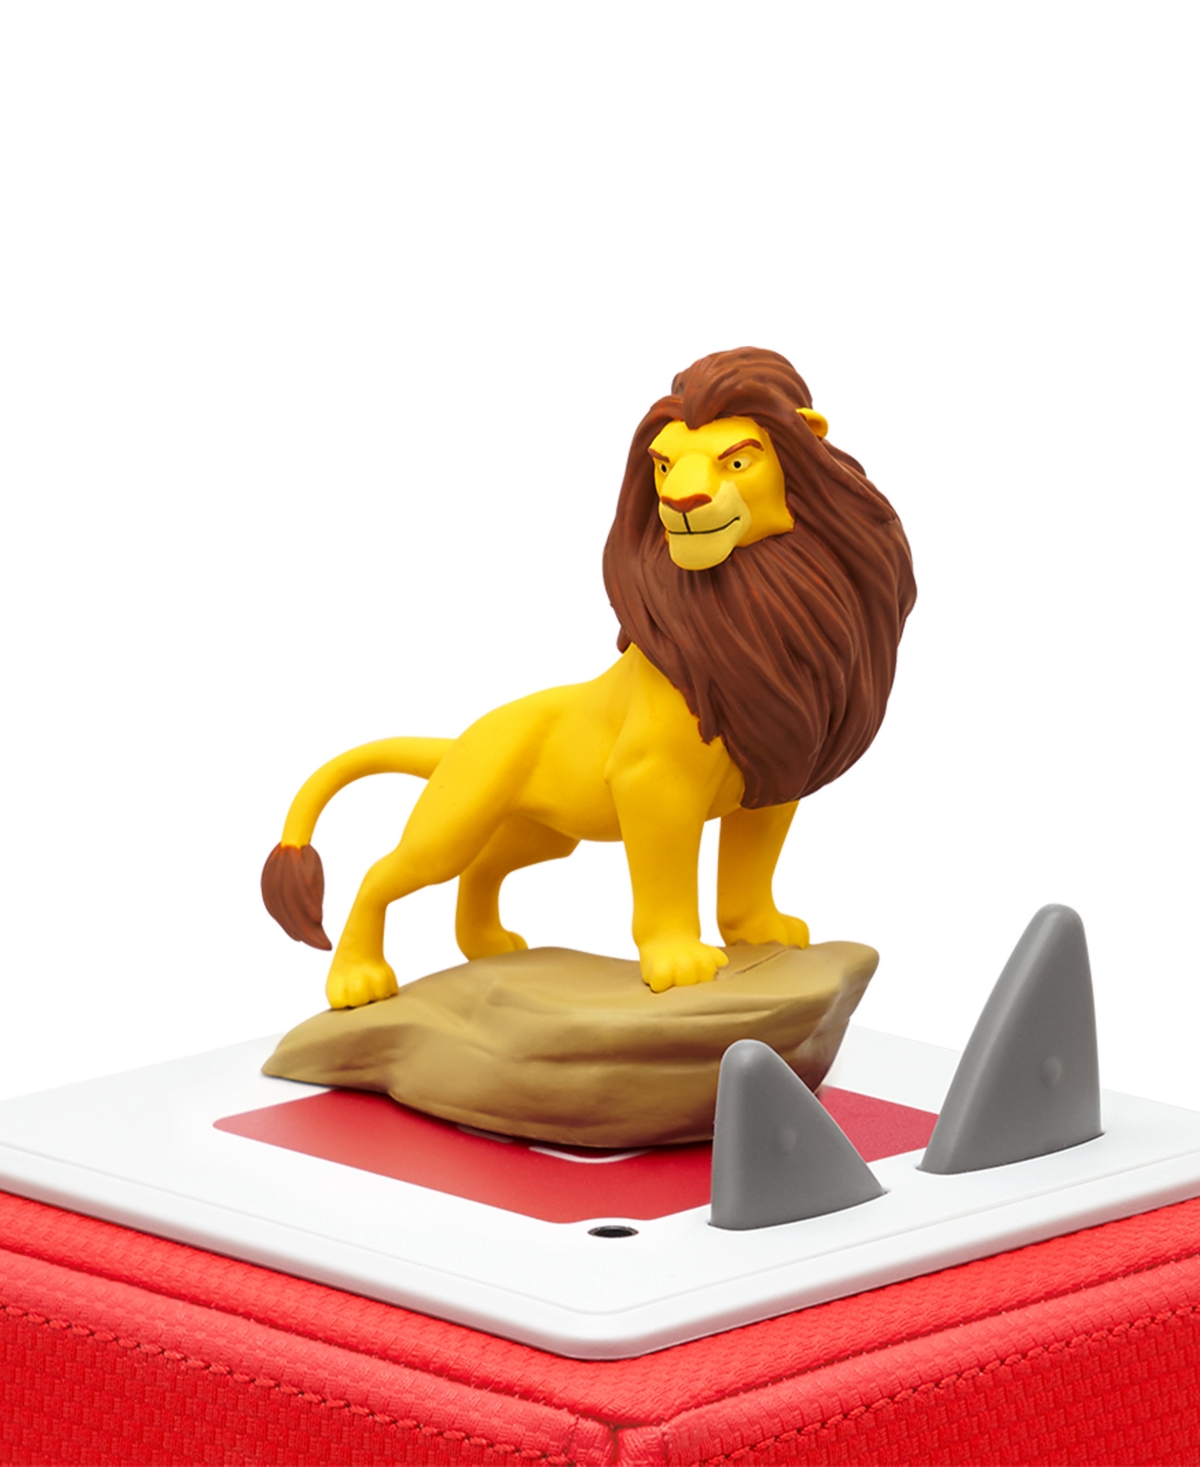 Shop Tonies Disney The Lion King Audio Play Figurine In No Color